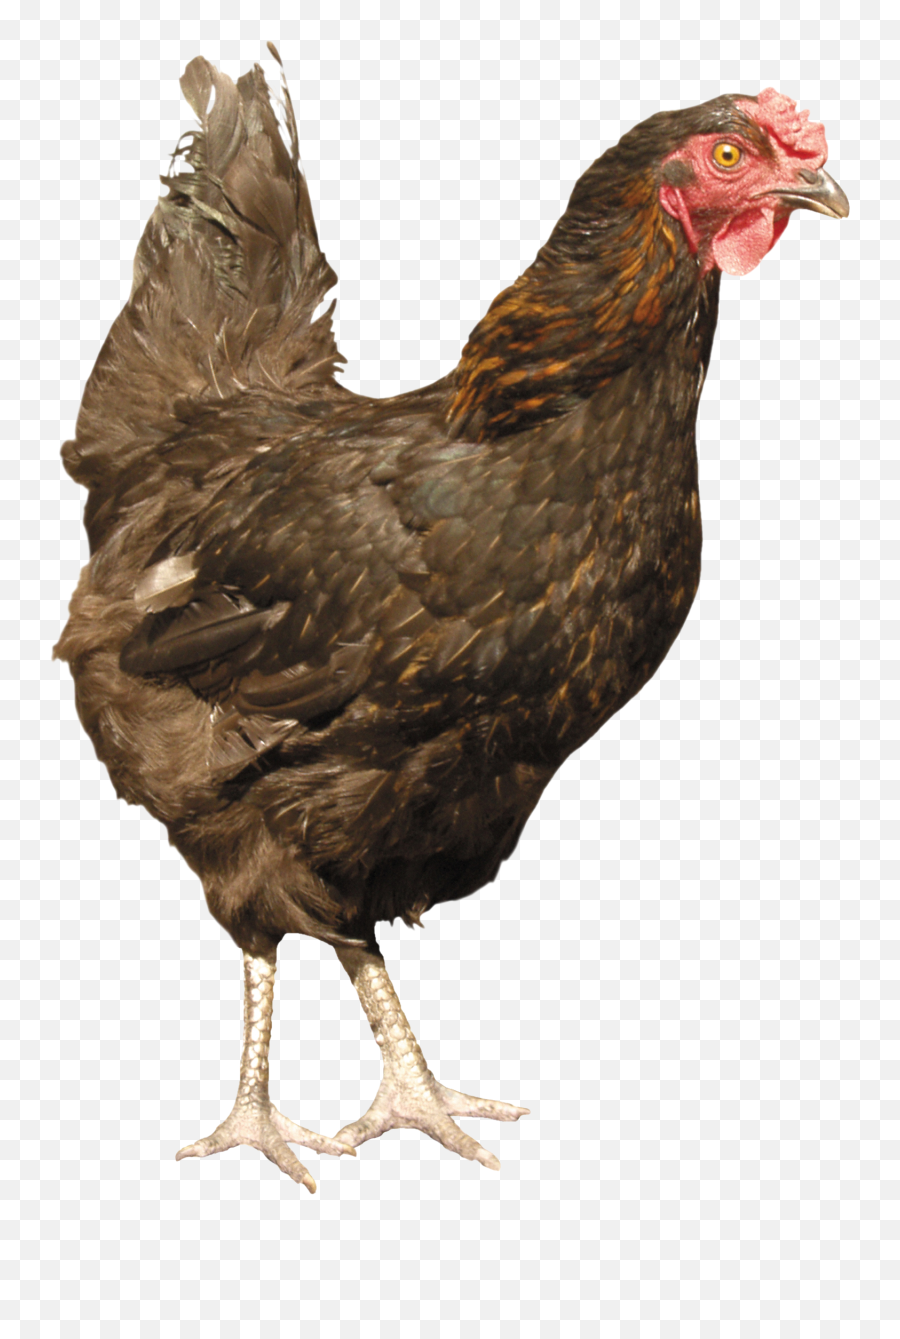 Chicken Png Images